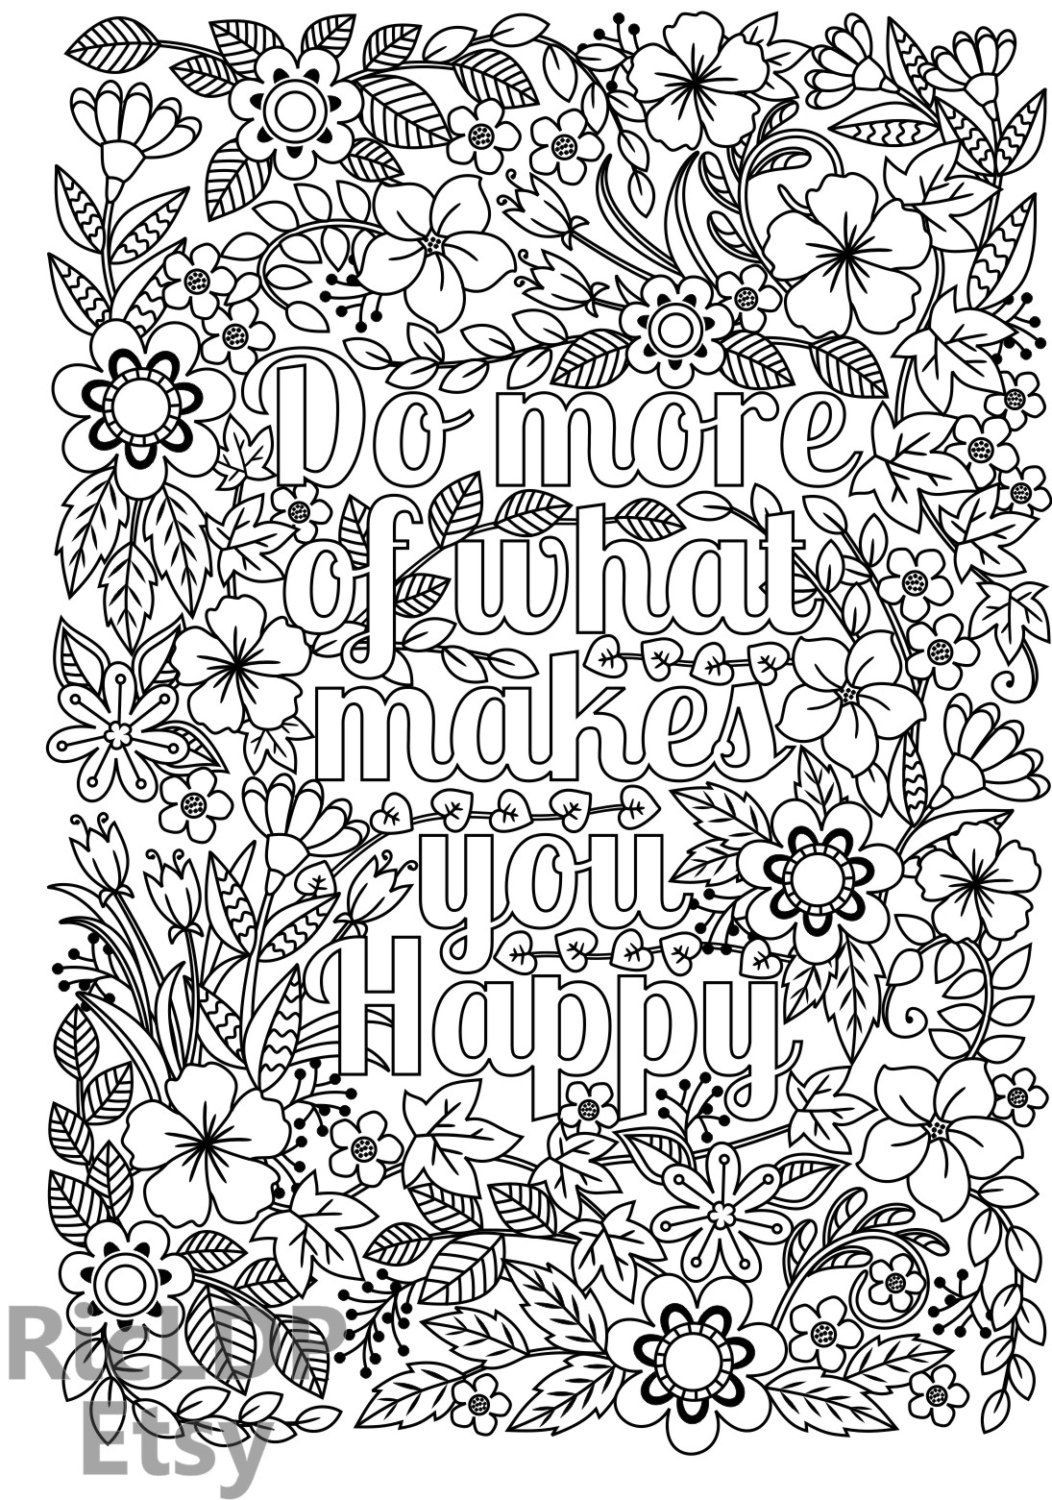 Coloring Pages For Adults Free Printable
 Do More of What Makes You Happy Coloring Page for Kids